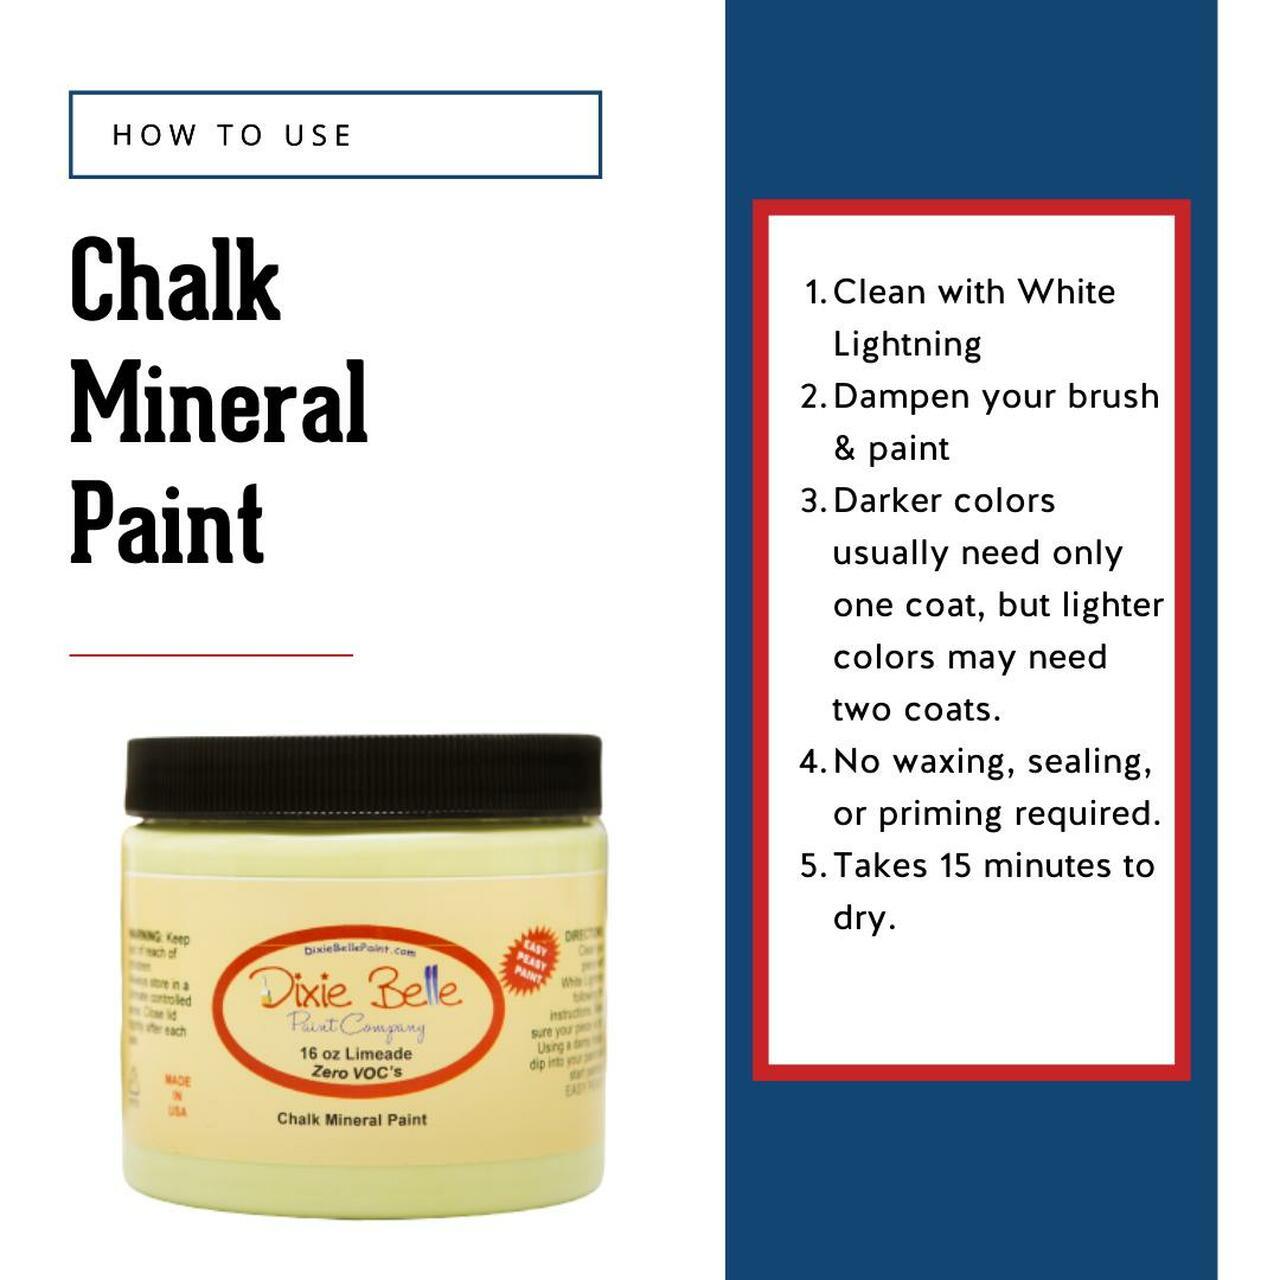 Antebellum Blue Dixie Belle Chalk Mineral Paint - Same Day Shipping - No VOC - Chalk Paint for Furniture and Cabinets - Water Based Paint - belleandbeau850